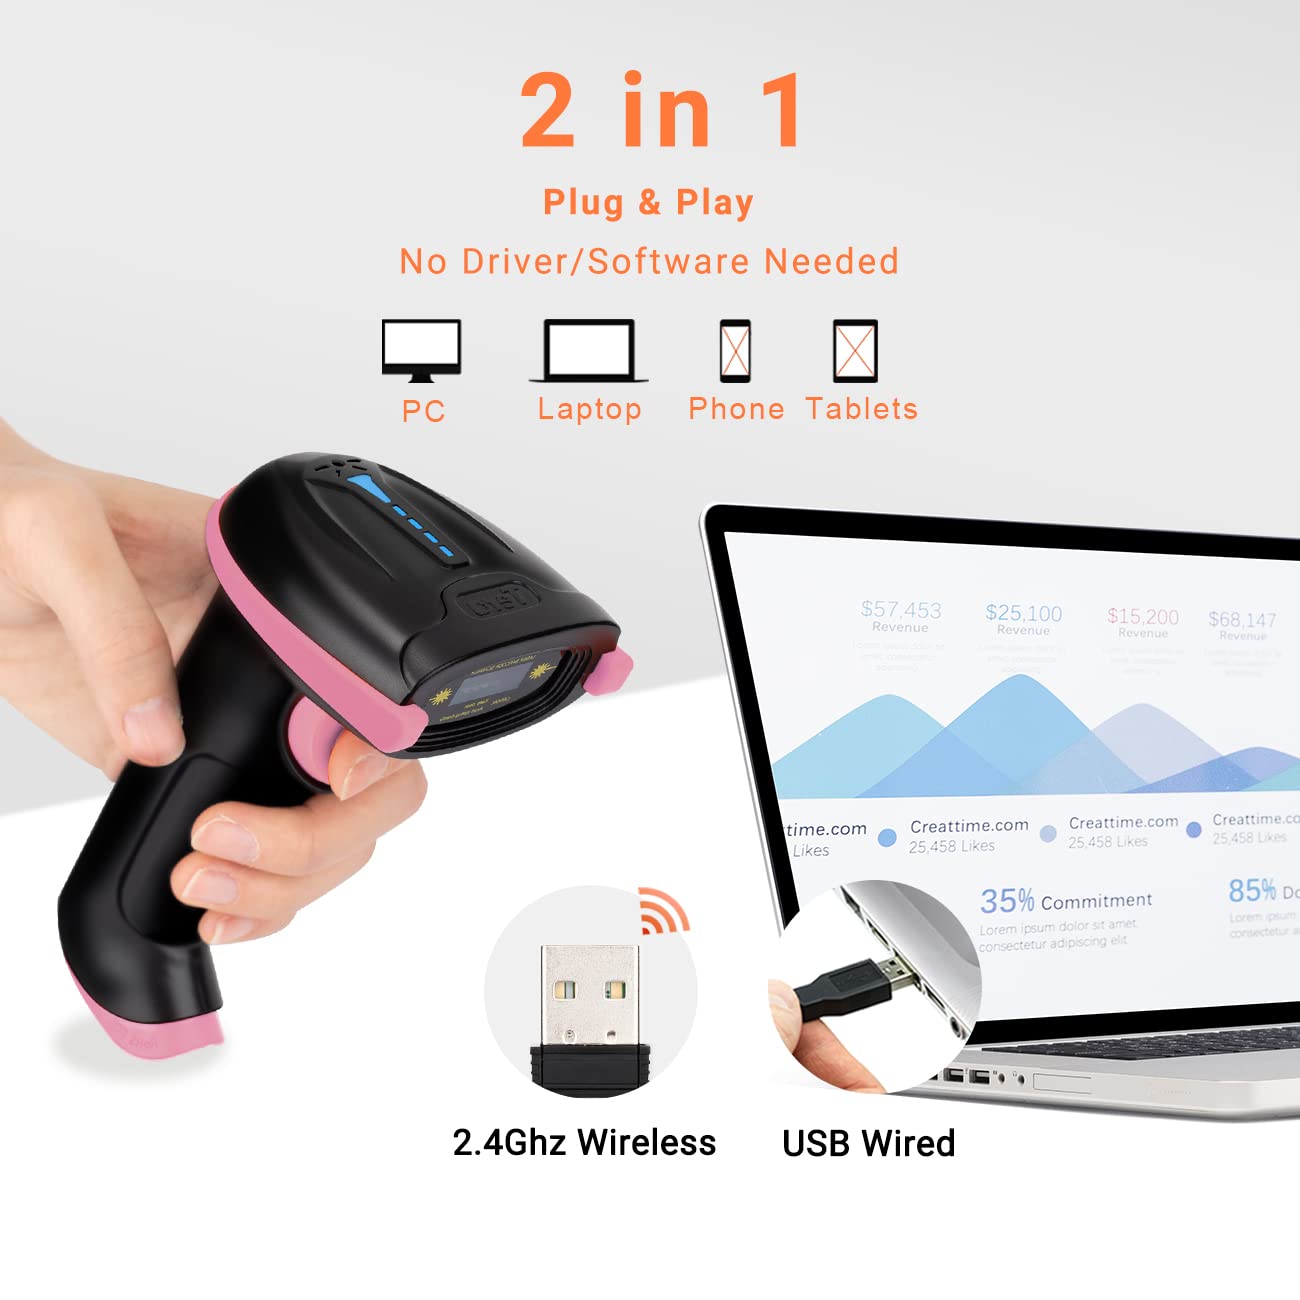 Tera Barcode Scanner Wireless Versatile 2-in-1 (2.4Ghz Wireless+USB 2.0 Wired) with Battery Level Indicator, 328 Feet Transmission Distance Rechargeable 1D Laser Bar Code Reader Handheld 5100 Pink